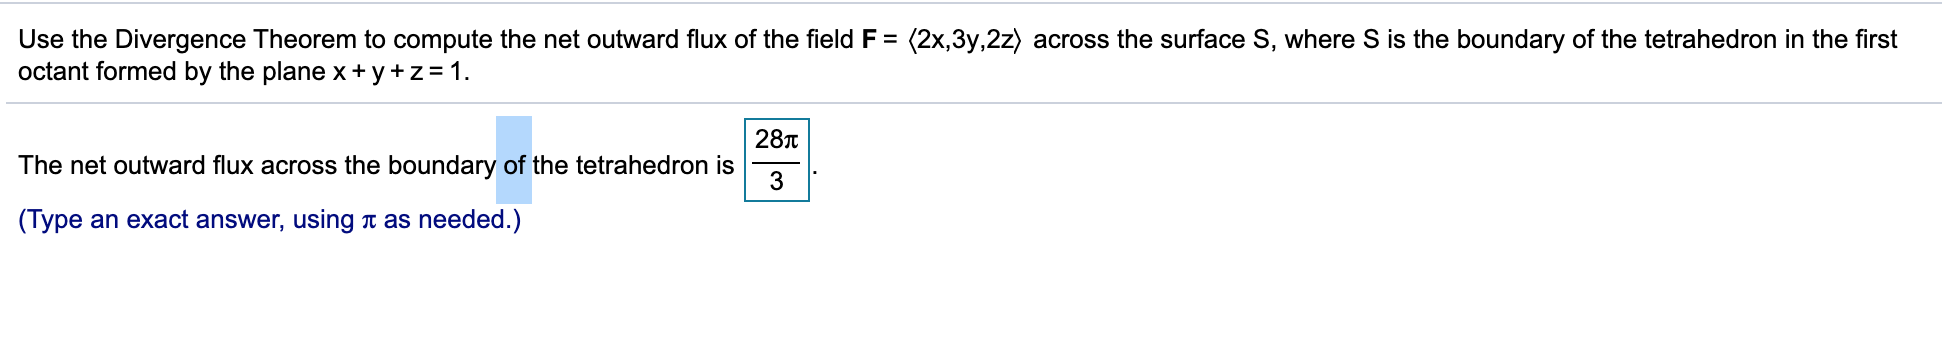 Use the Divergence Theorem to compute the net outward flux of the field F = (2x,3y,2z) across the surface S, where S is the boundary of the tetrahedron in the first
octant formed by the plane x + y +z = 1.
28T
The net outward flux across the boundary of the tetrahedron is
3
(Type an exact answer, using n as needed.)
